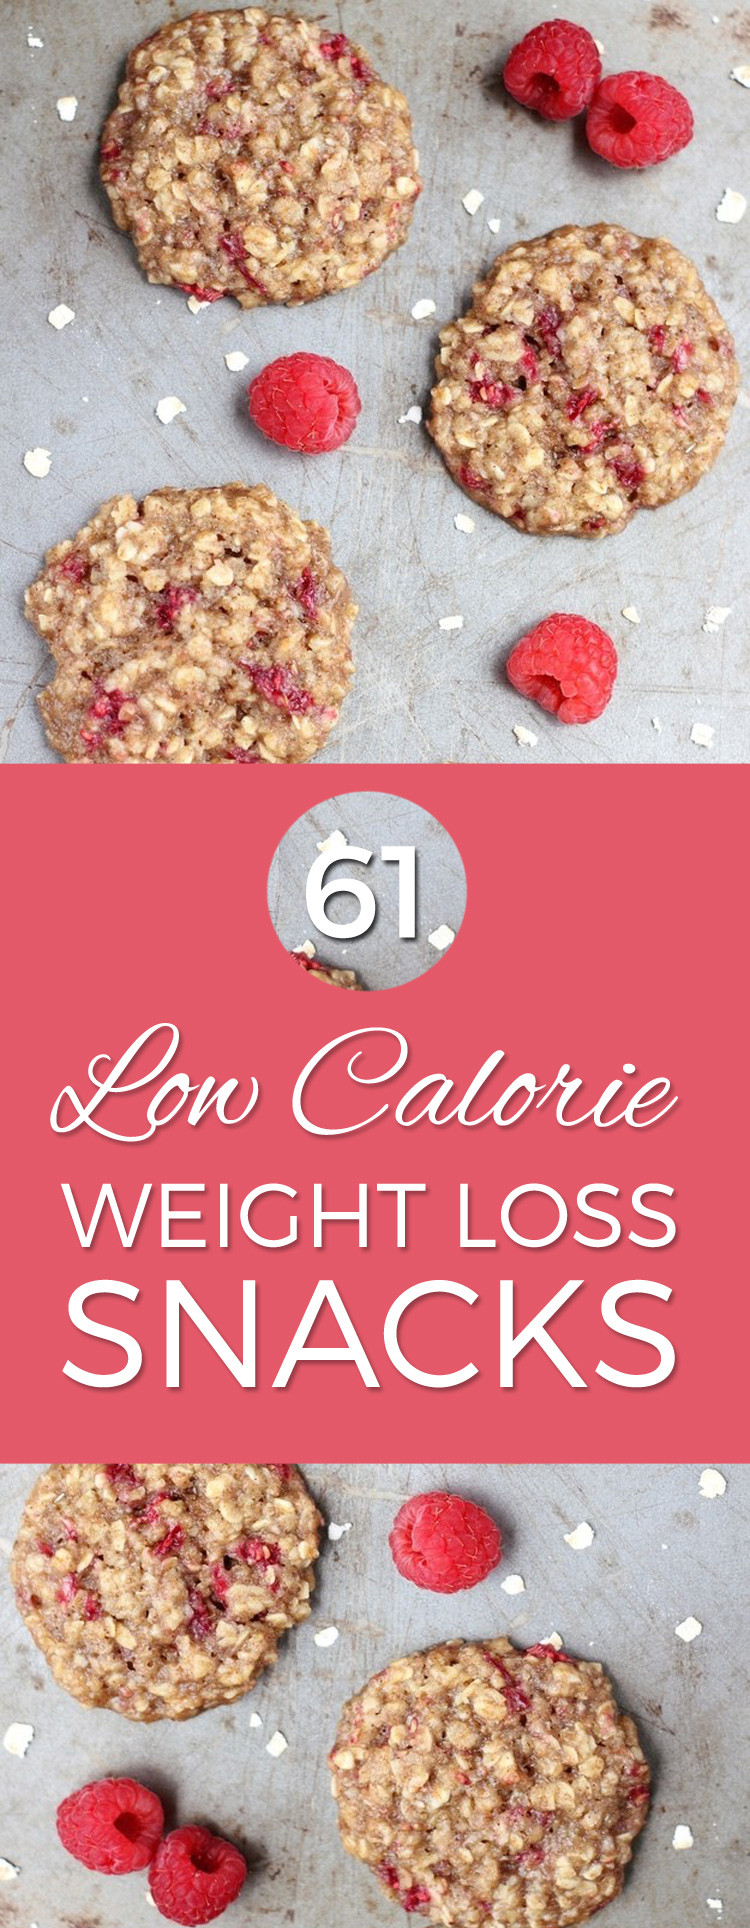 Low Calorie Healthy Snacks
 61 Super Healthy Super Low Calorie Snacks To Help You Lose